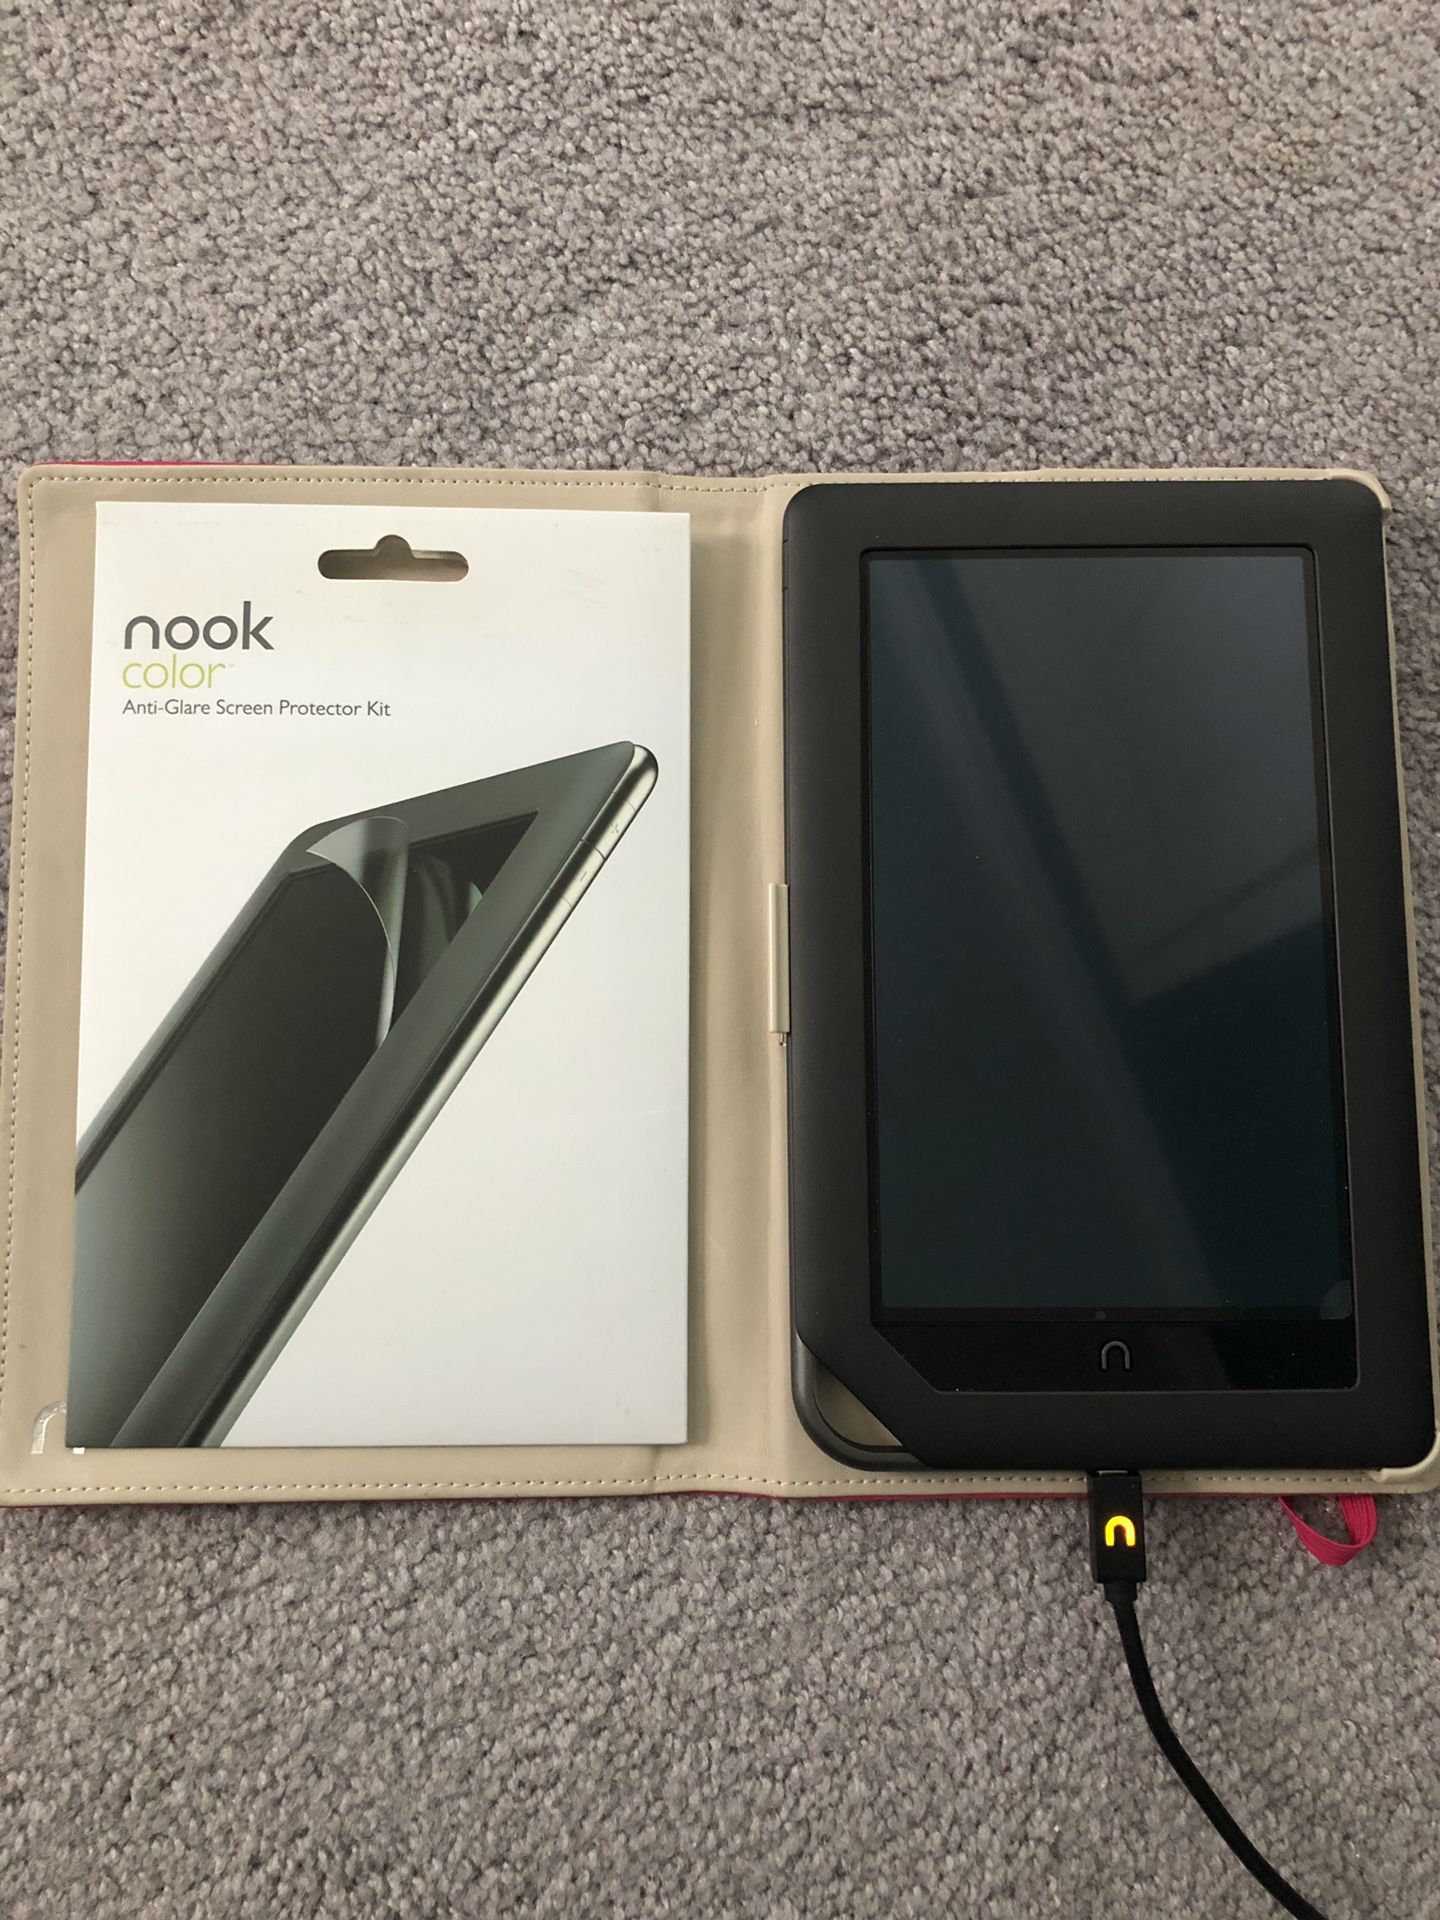 Nook and Screen Protector Kit